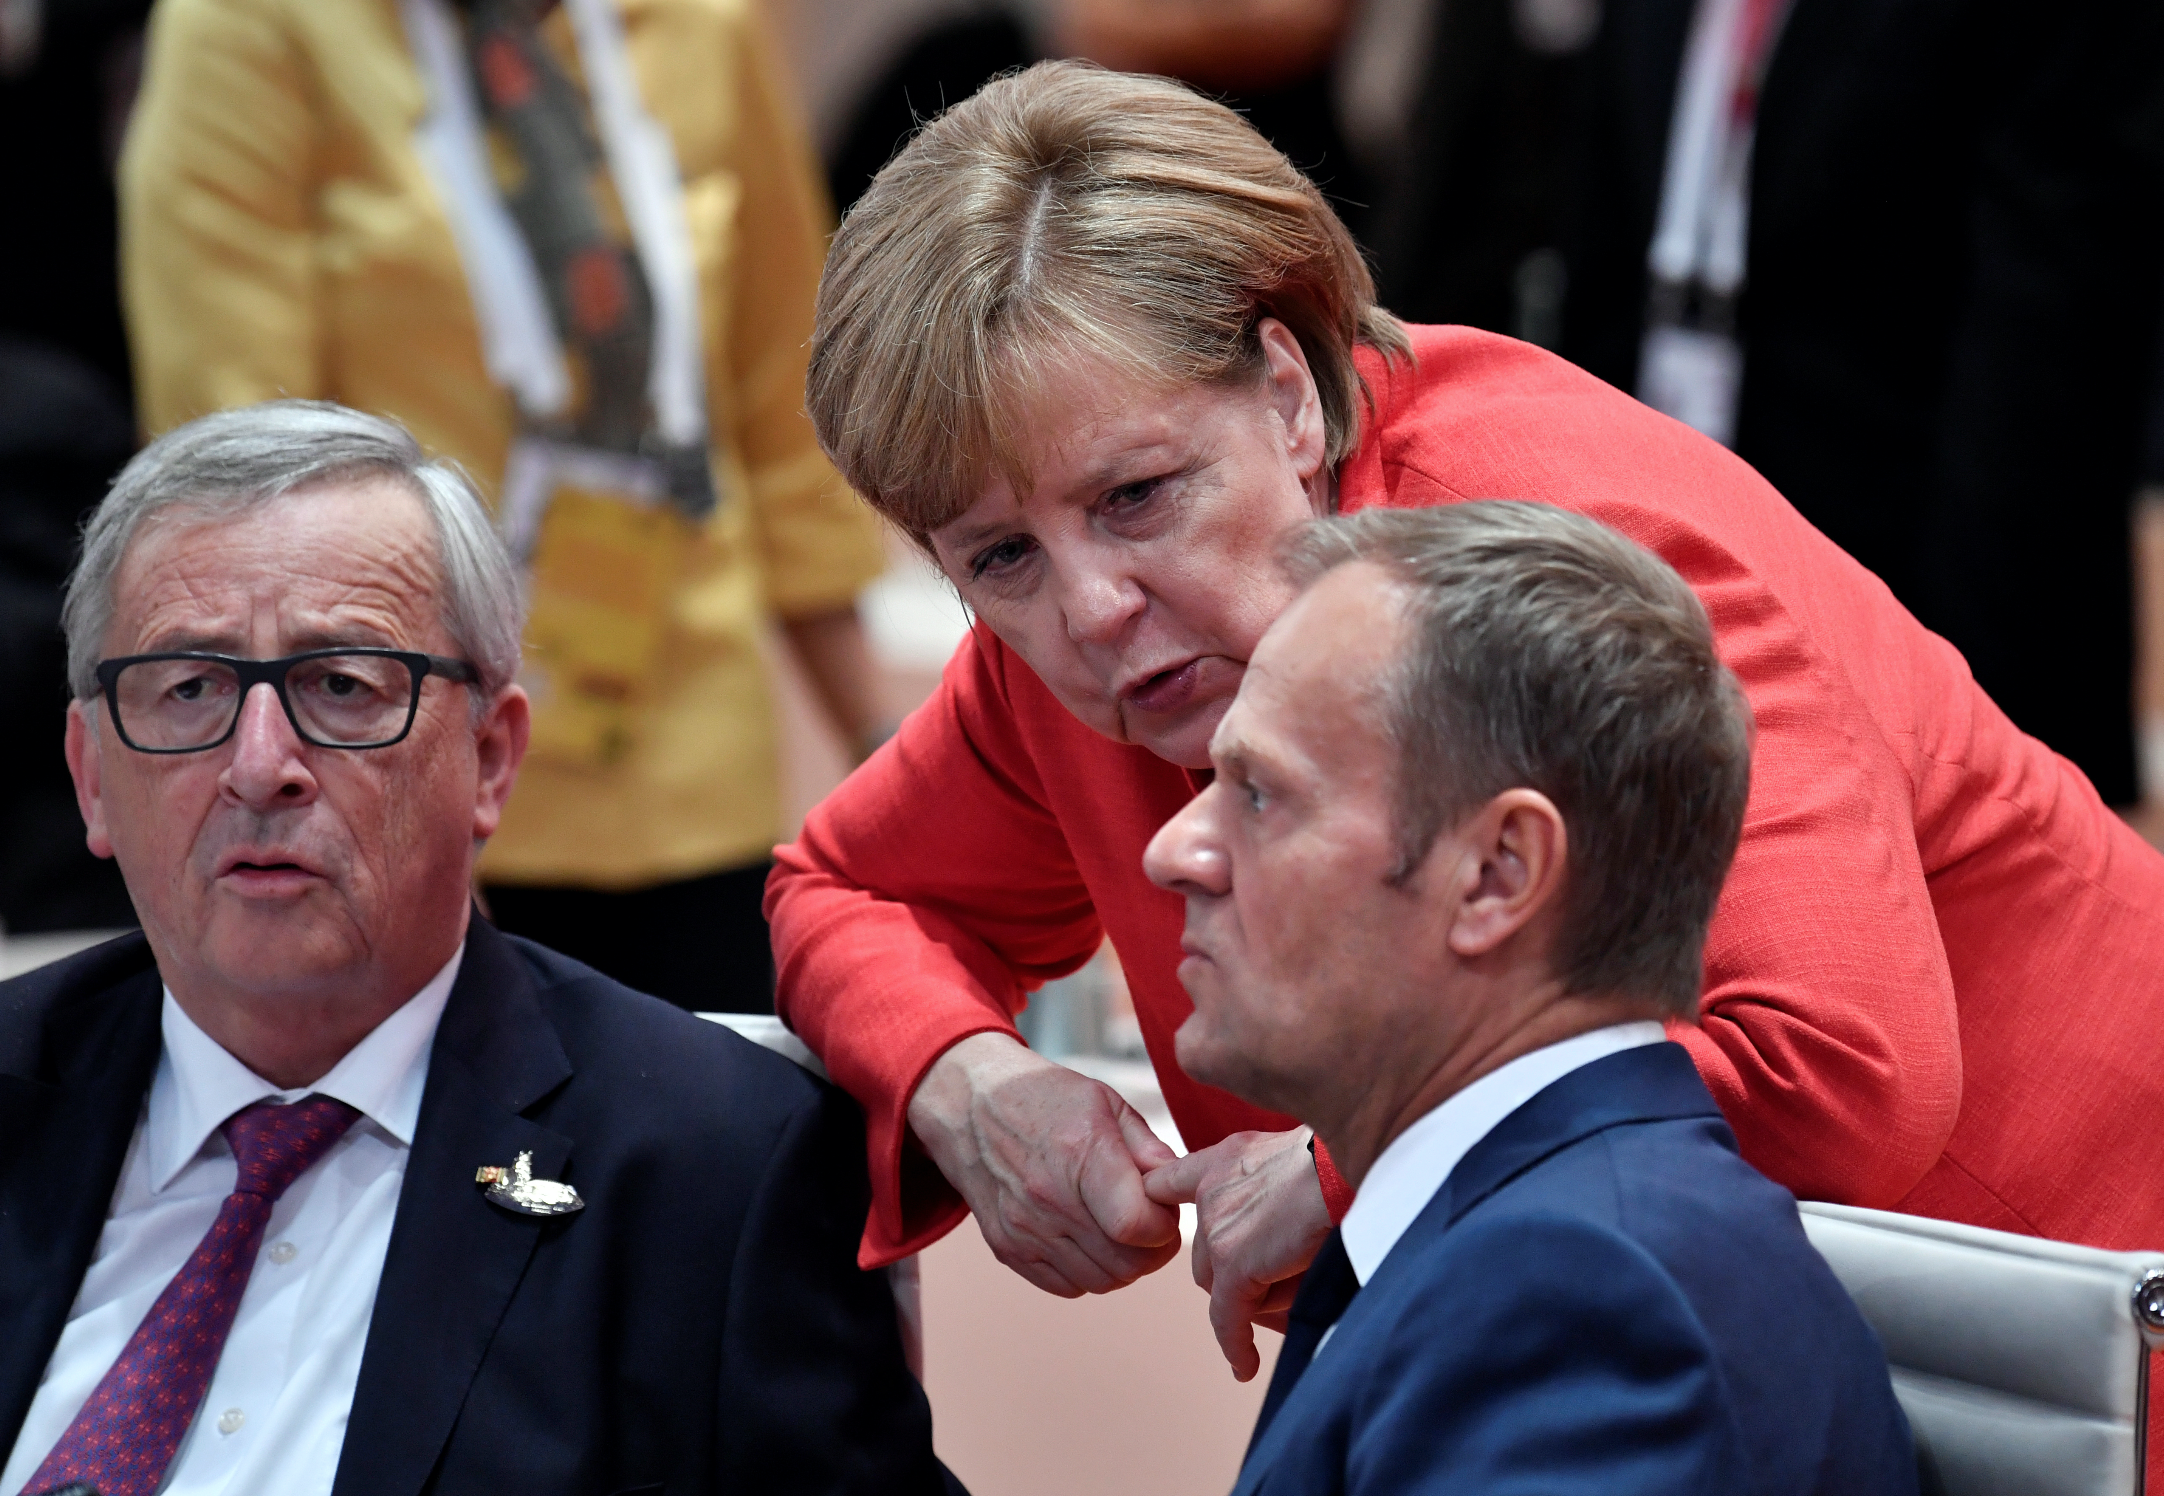 EC president Jean-Claude Juncker, German chancellor Angela Merkel, and Council president Donald Tusk all hail from the European People's Party